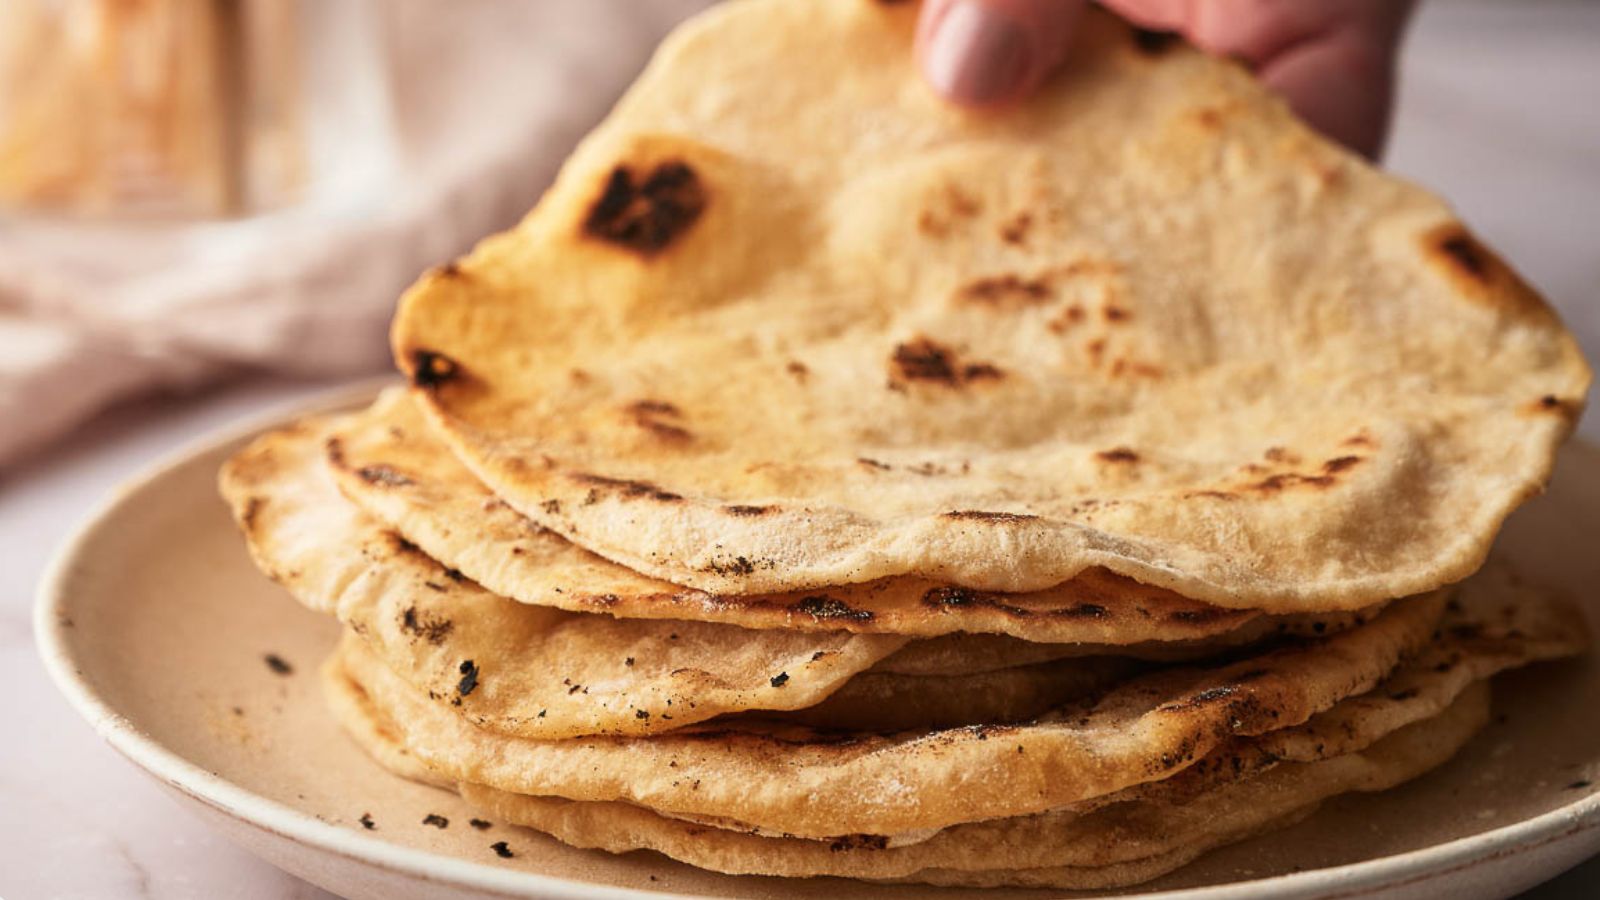 <p>Say goodbye to store-bought tortillas and hello to homemade goodness. These Flour Tortillas are soft and fluffy – forget the mediocre store-bought ones! With just a few simple ingredients, you’ll have delicious tortillas perfect for wrapping up your favorite fillings. Level up your tacos, burritos, or any Mexican-inspired dish with these homemade tortillas.<br><strong>Get the Recipe: </strong><a href="https://www.splashoftaste.com/flour-tortilla-recipe/?utm_source=msn&utm_medium=page&utm_campaign=msn">Flour Tortilla</a></p>